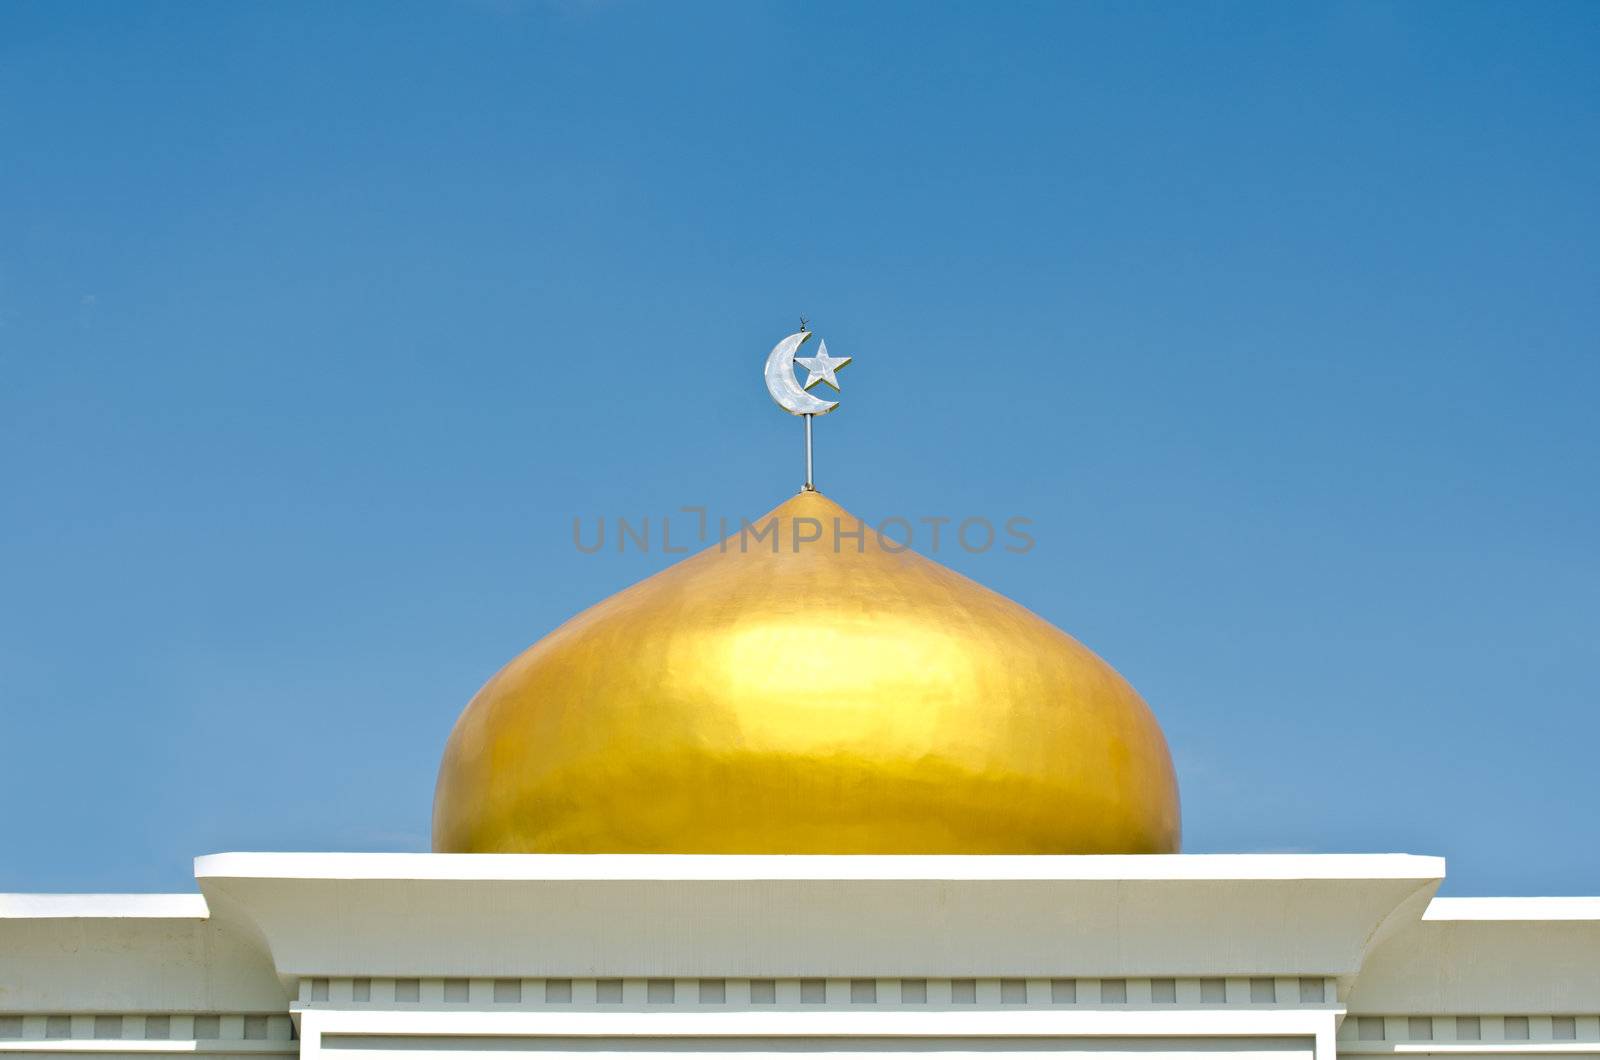 Stars and a month on The golden domes of Islamic symbols.